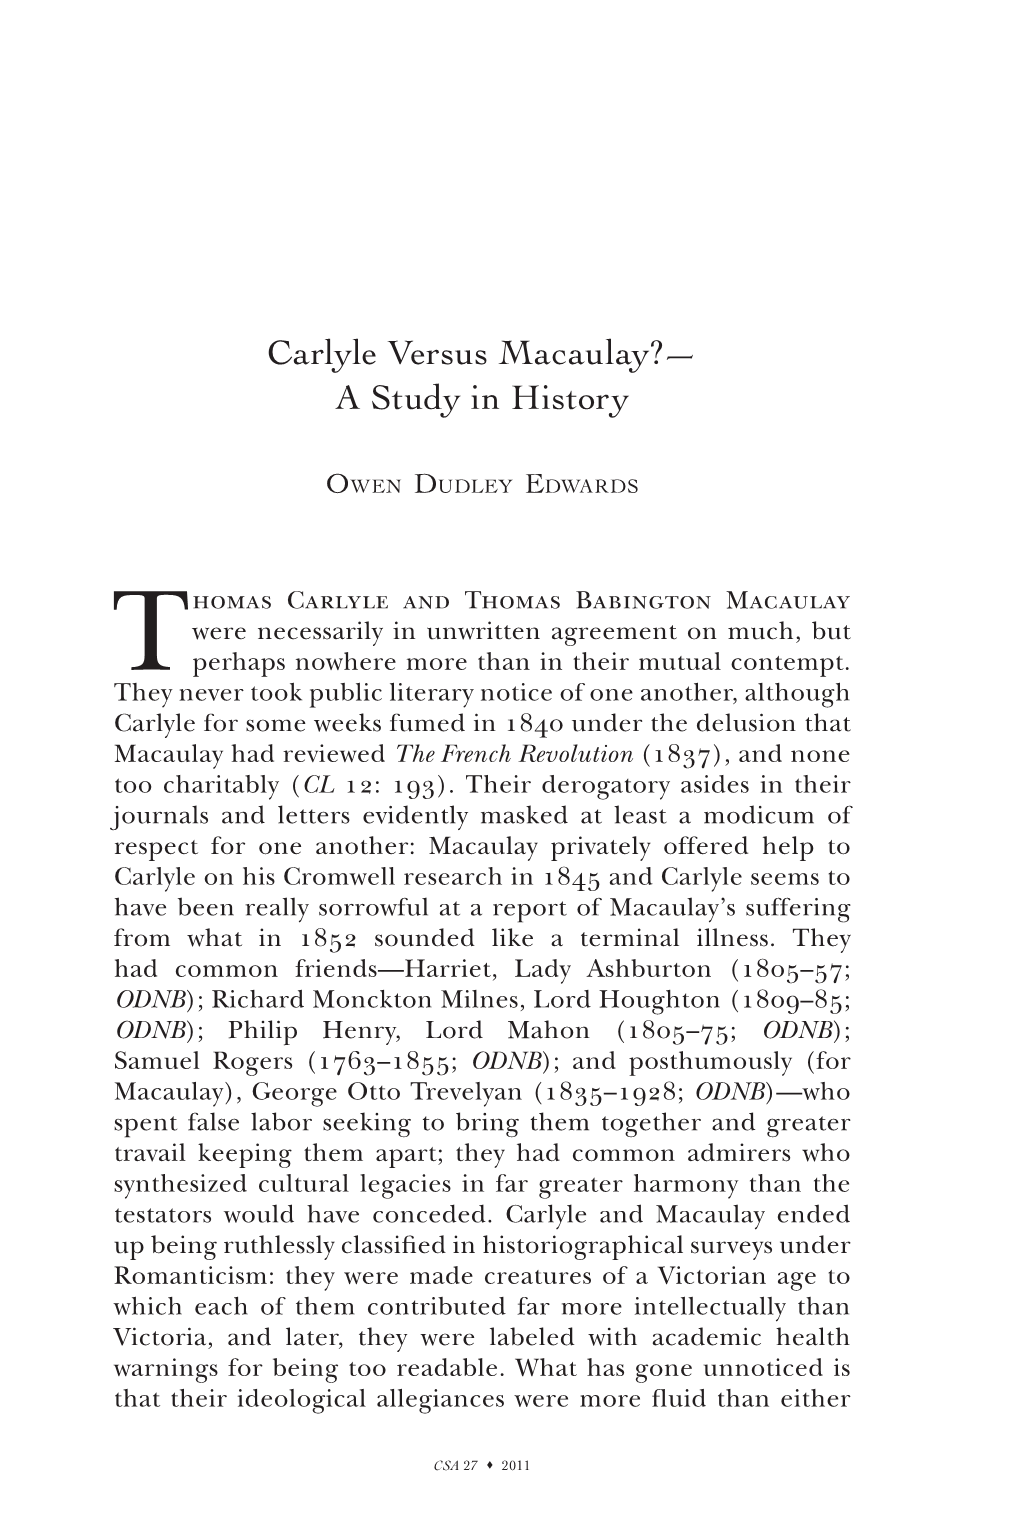 Carlyle Versus Macaulay?— a Study in History